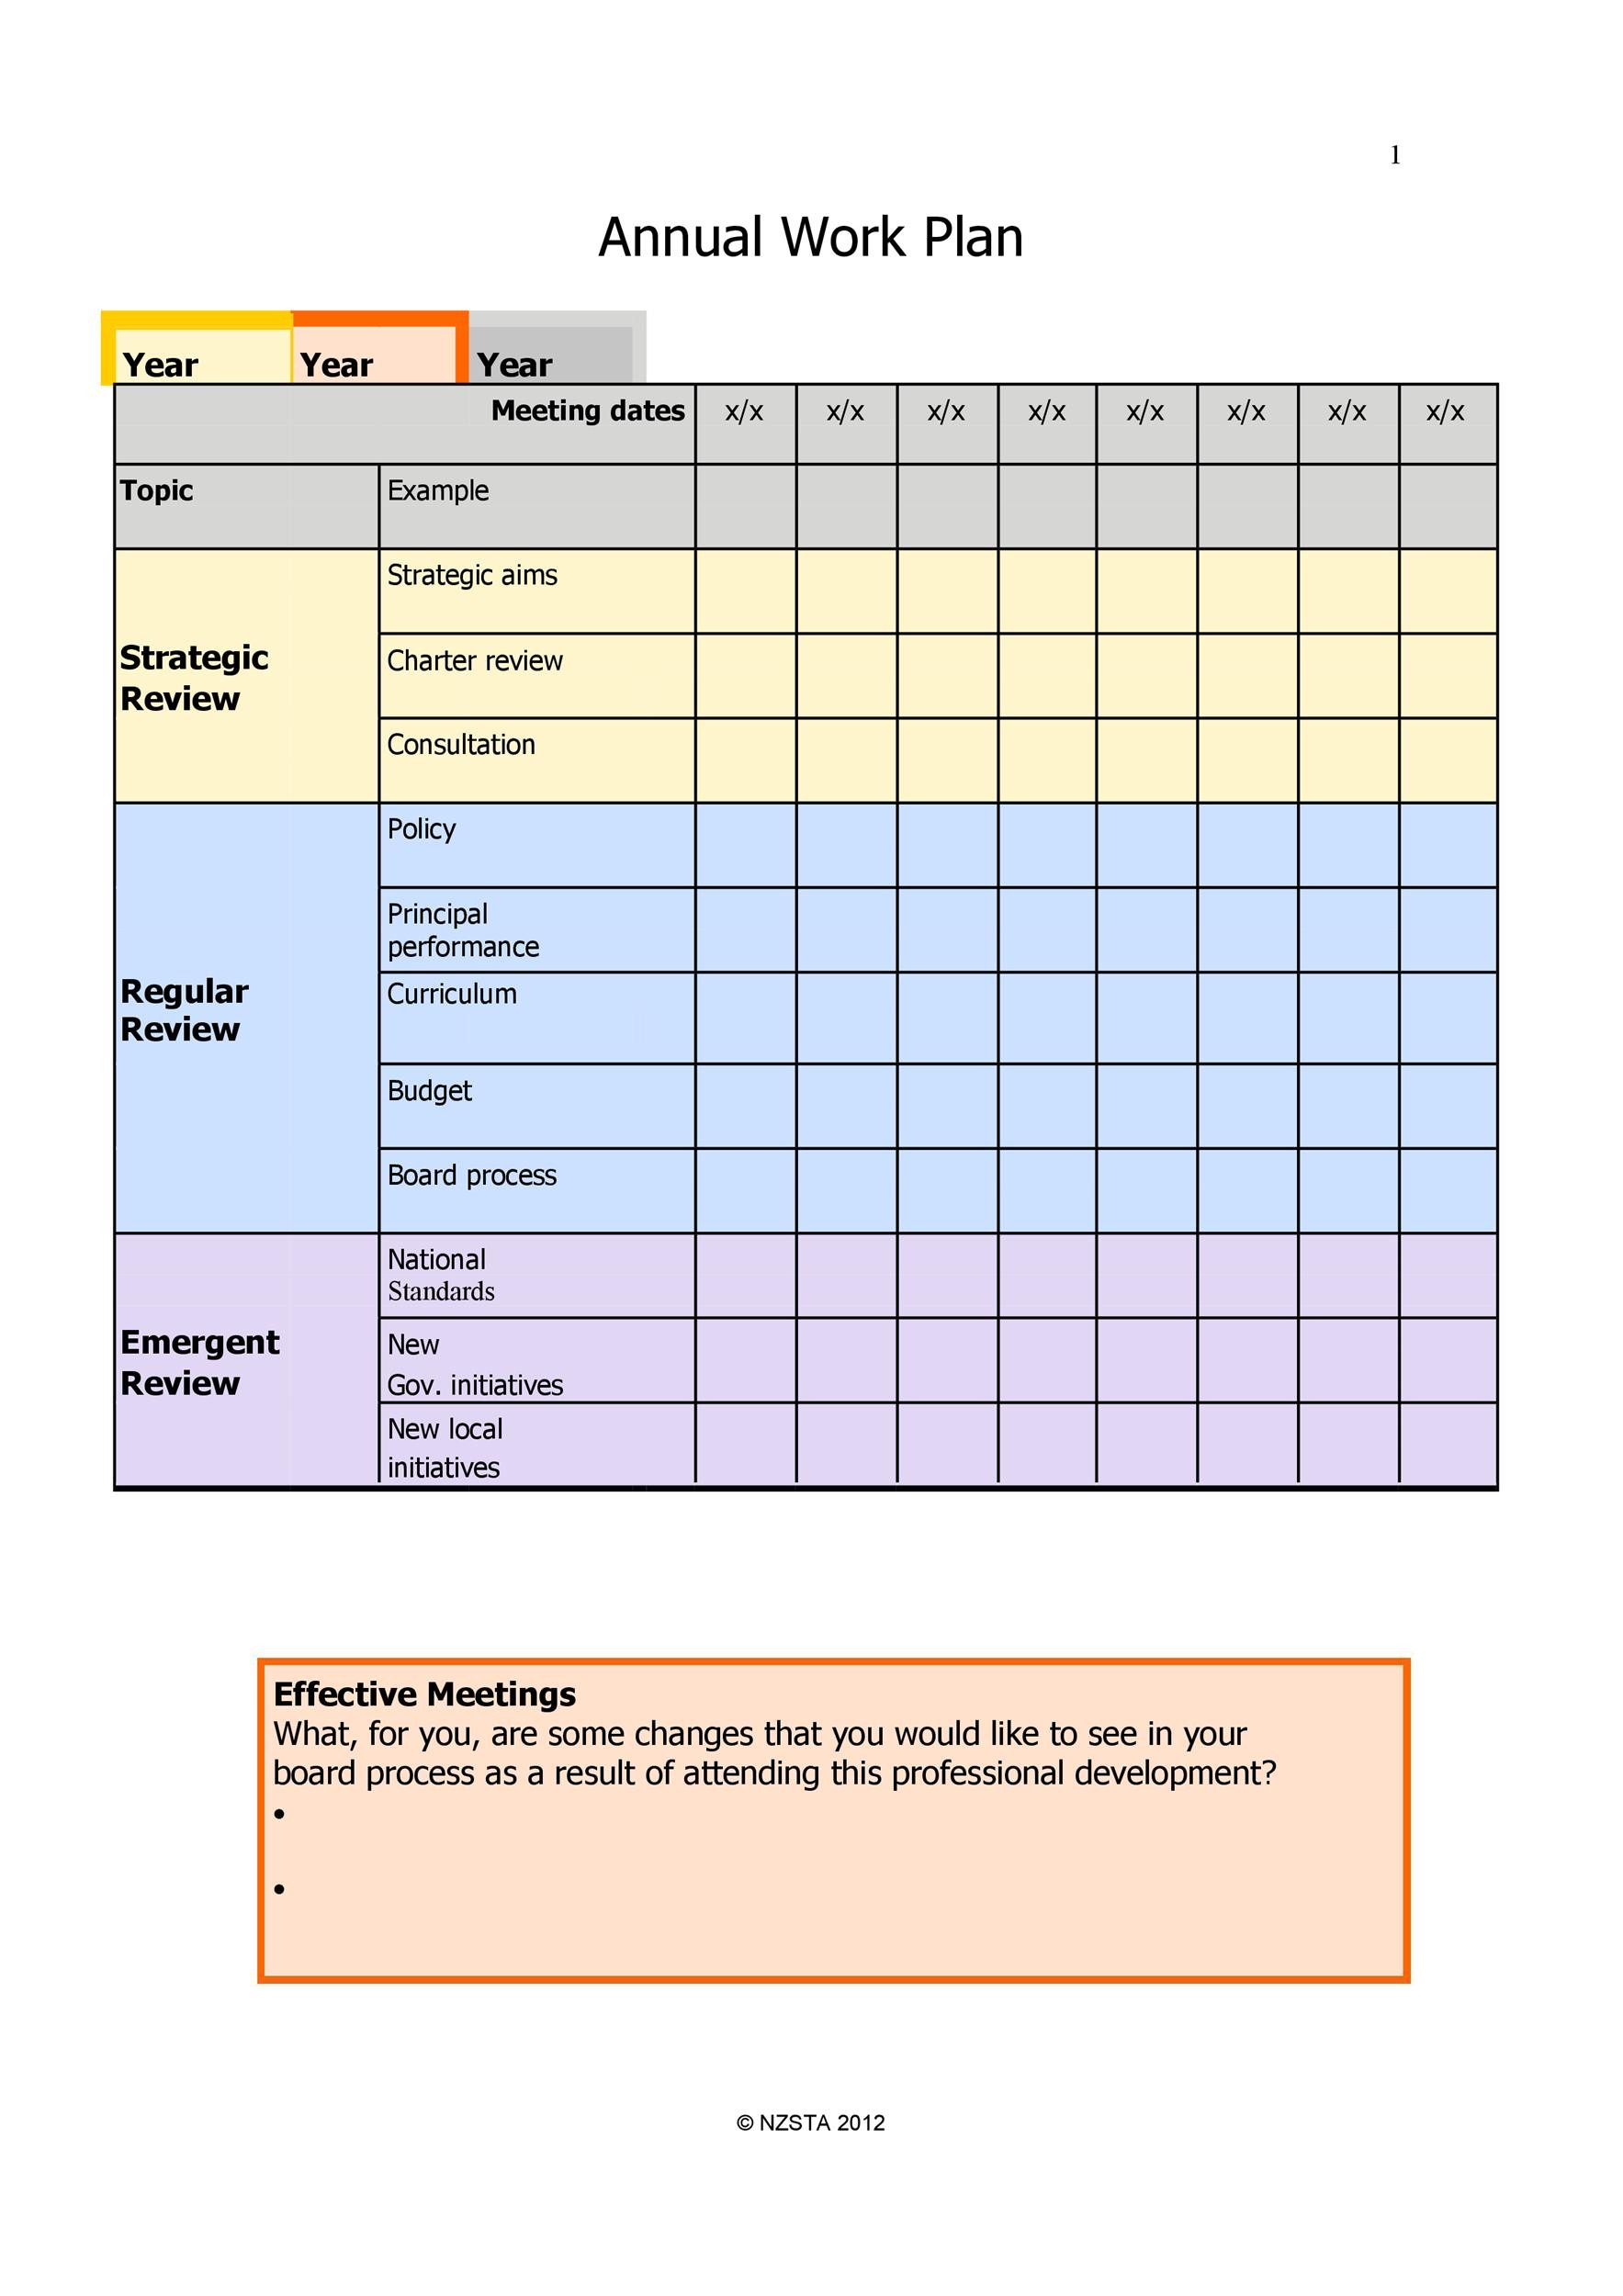 committee-work-plan-template-tutore-org-master-of-documents